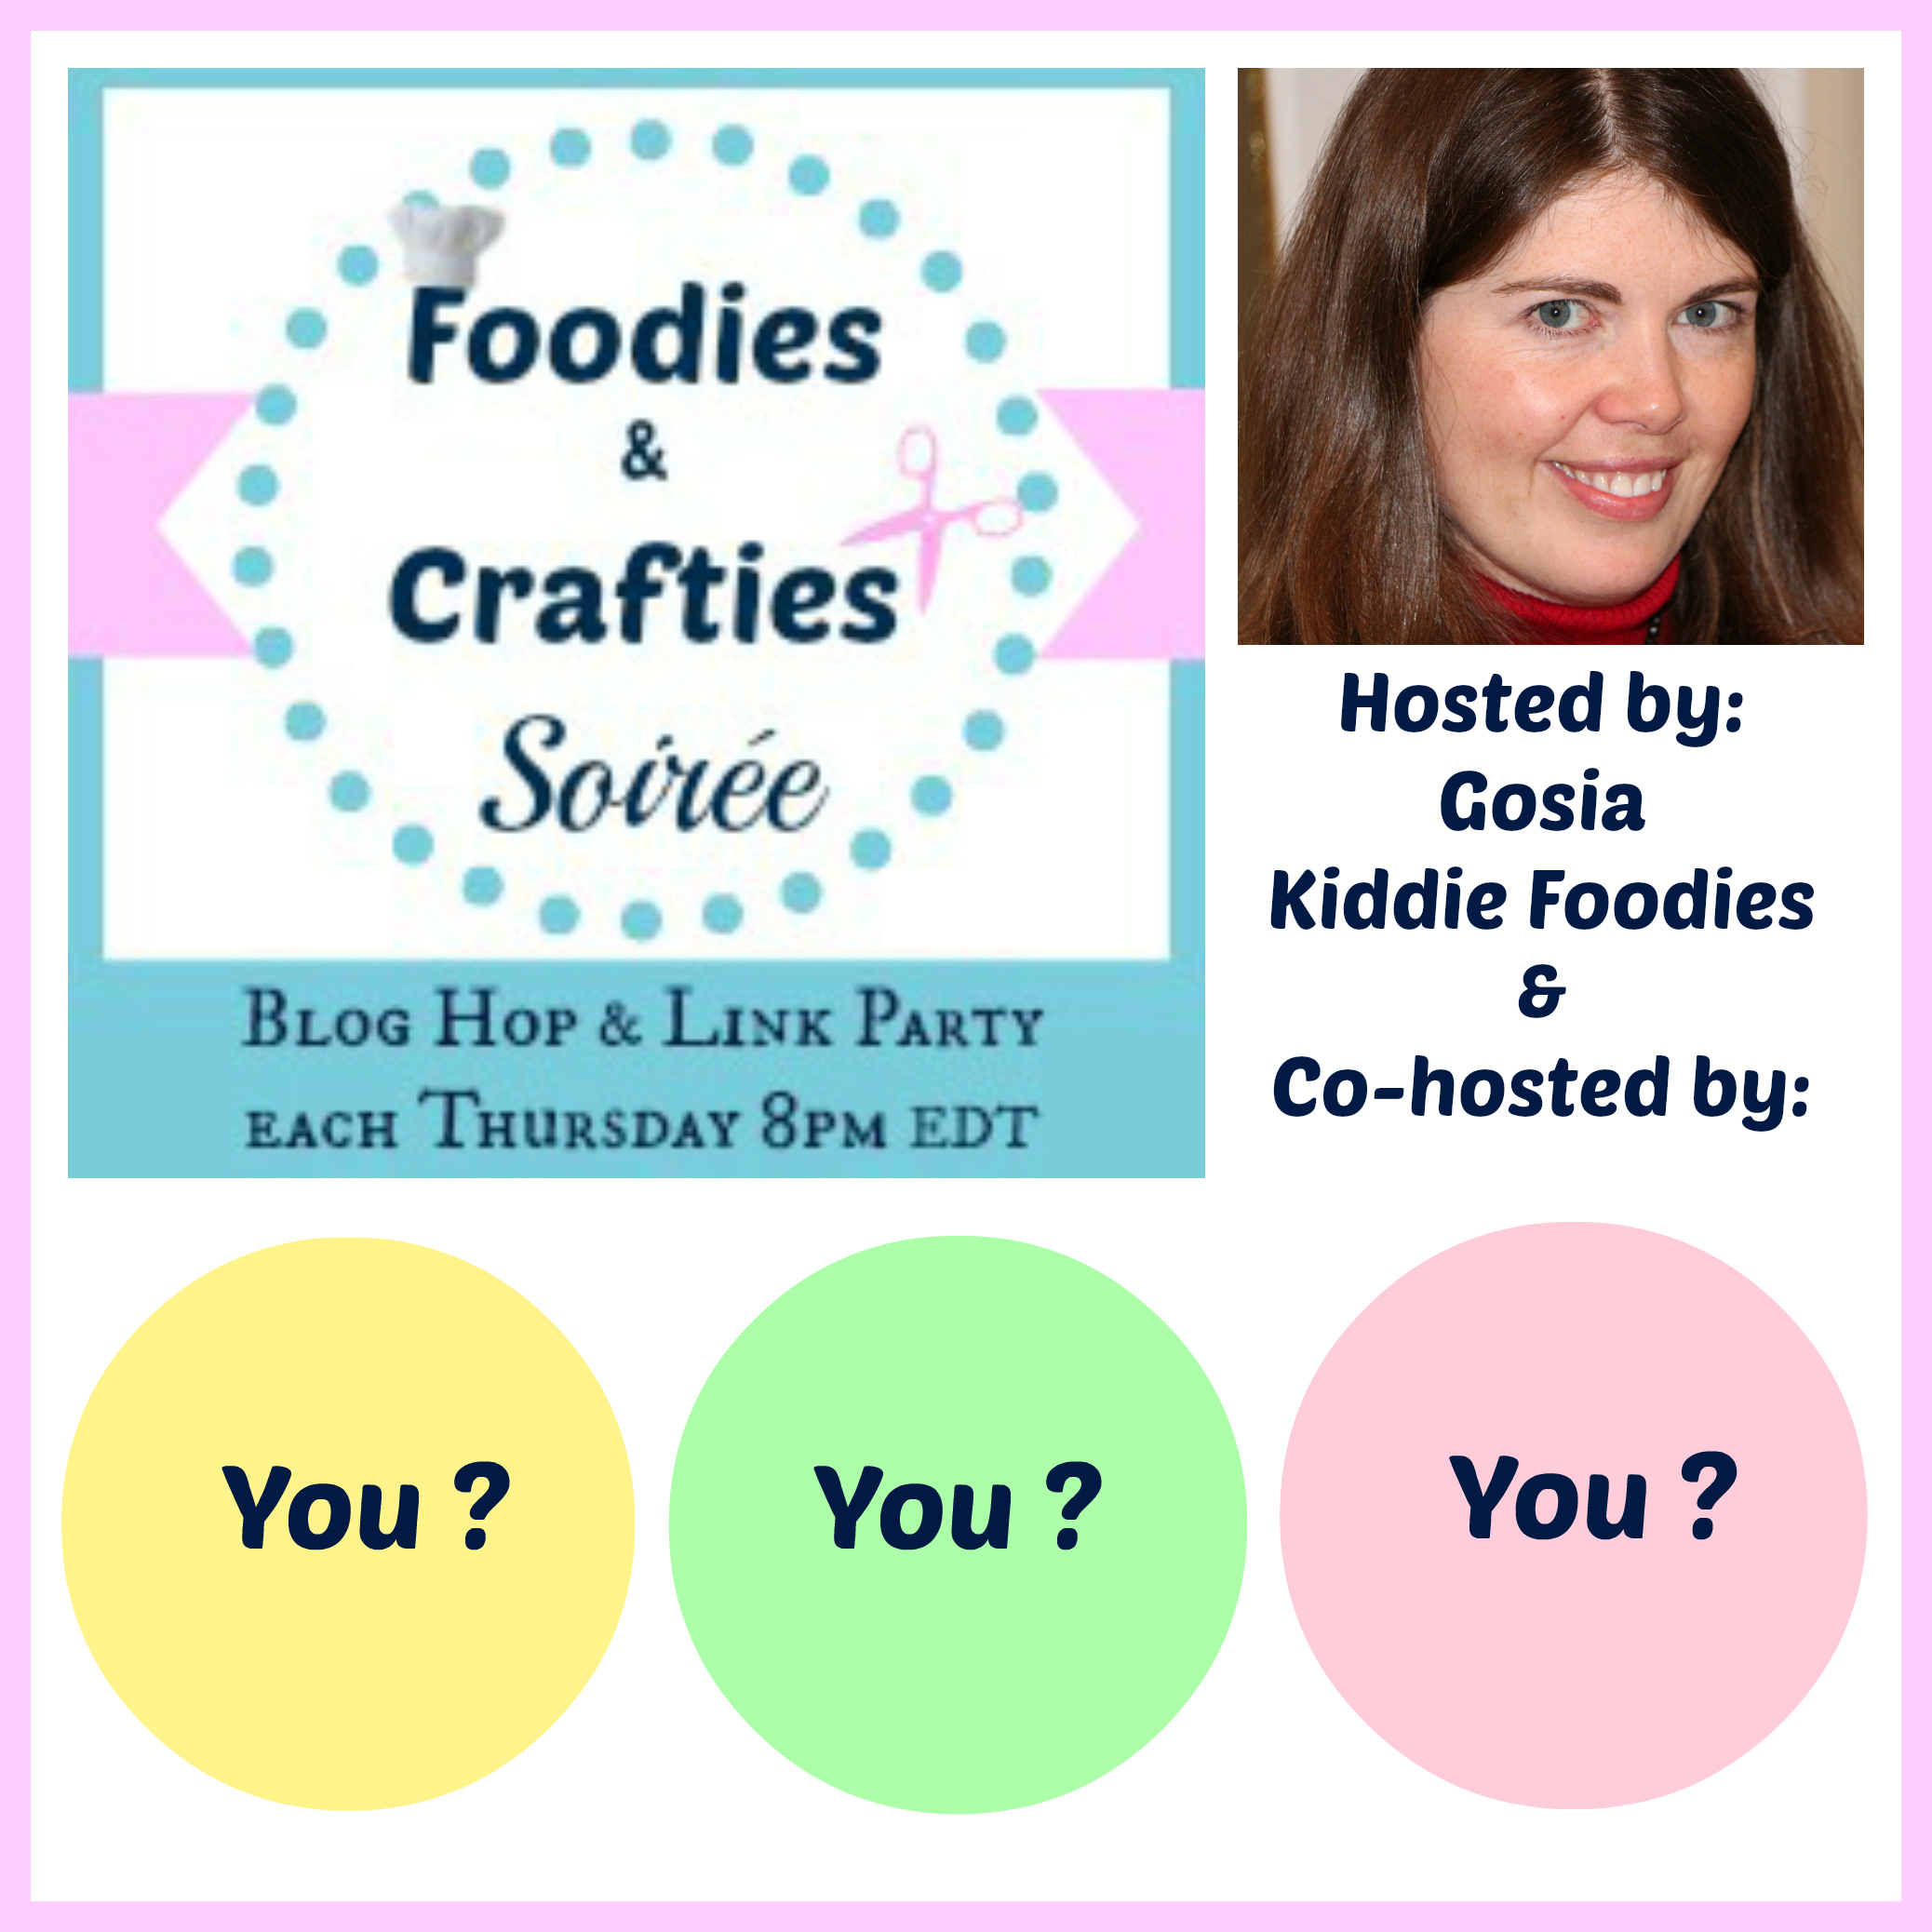 Foodies and Crafties Soiree host and co-hosts